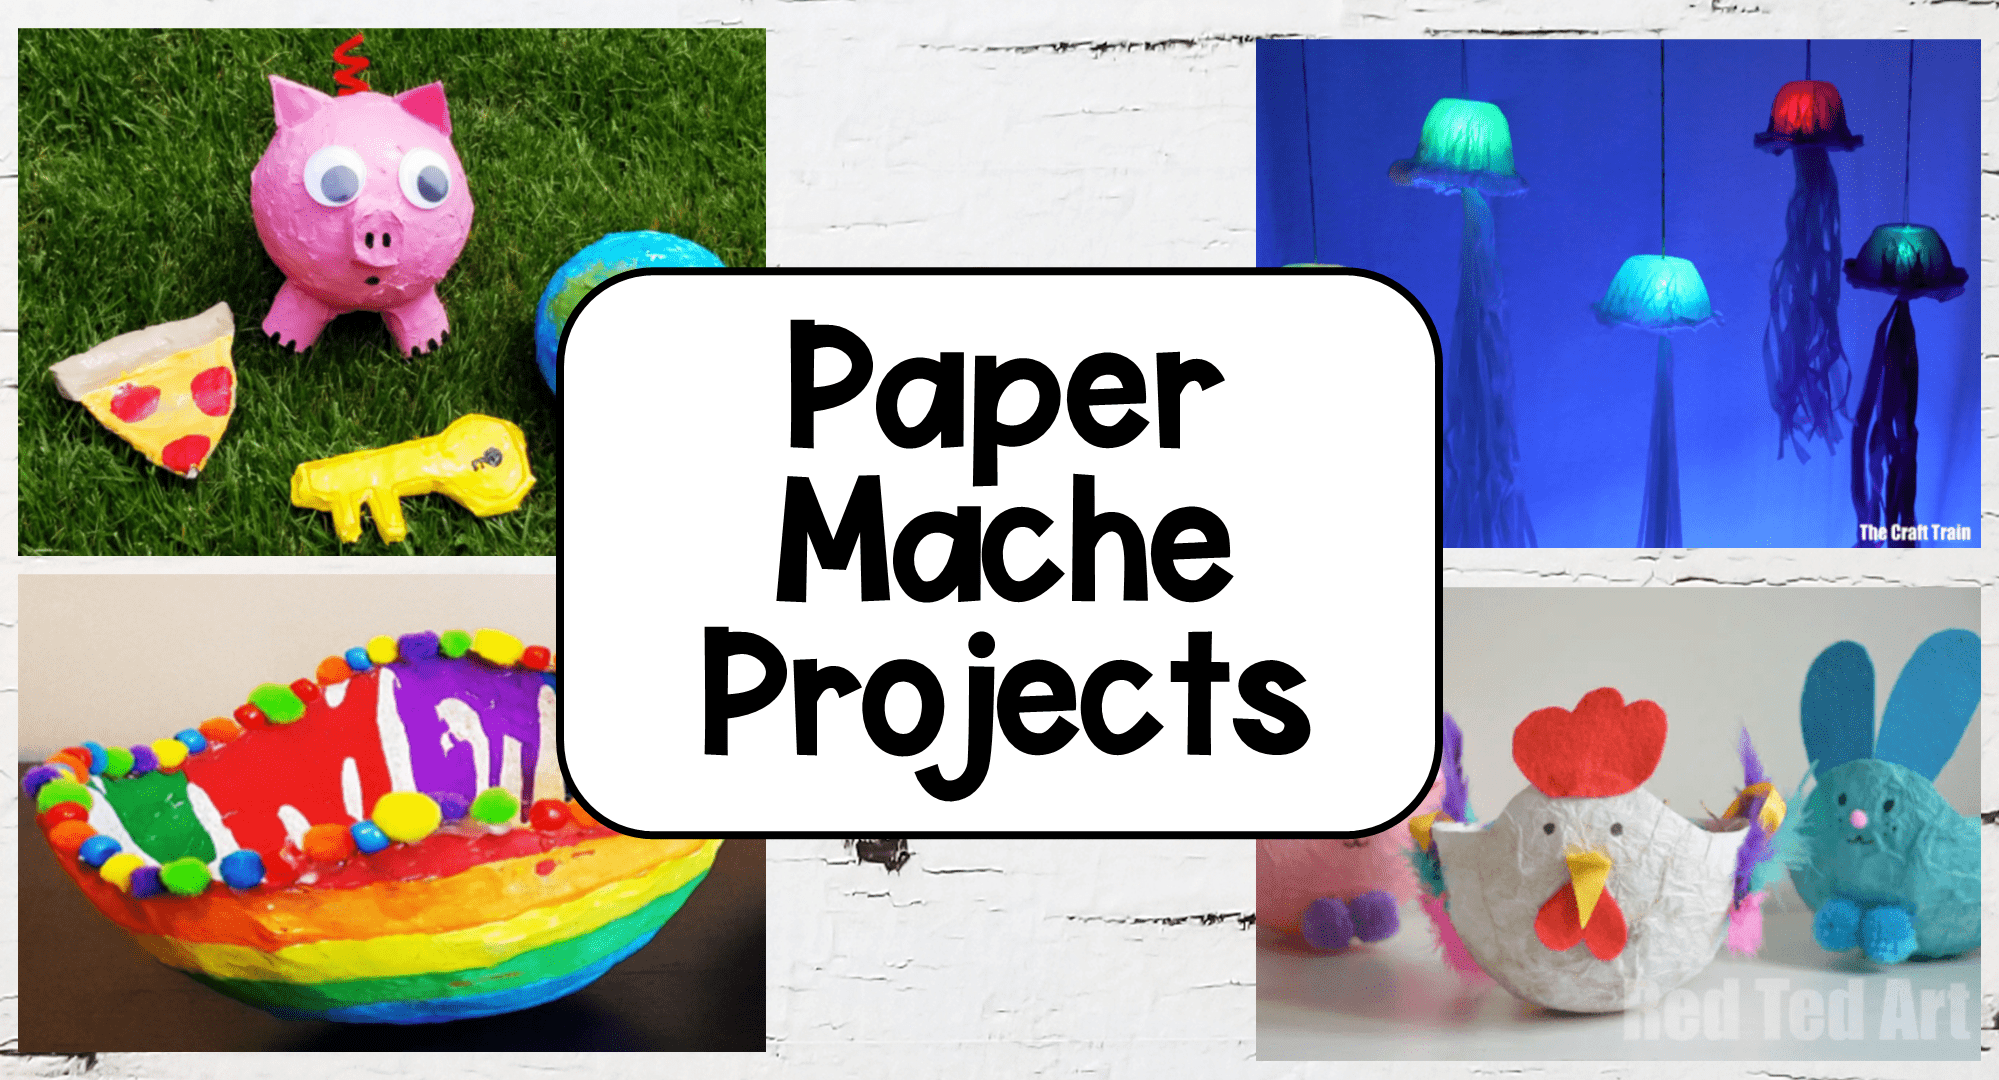 Paper Mache Animal Masks Lesson Plan: Sculpture Activities and Lessons for  Children and Kids: KinderArt